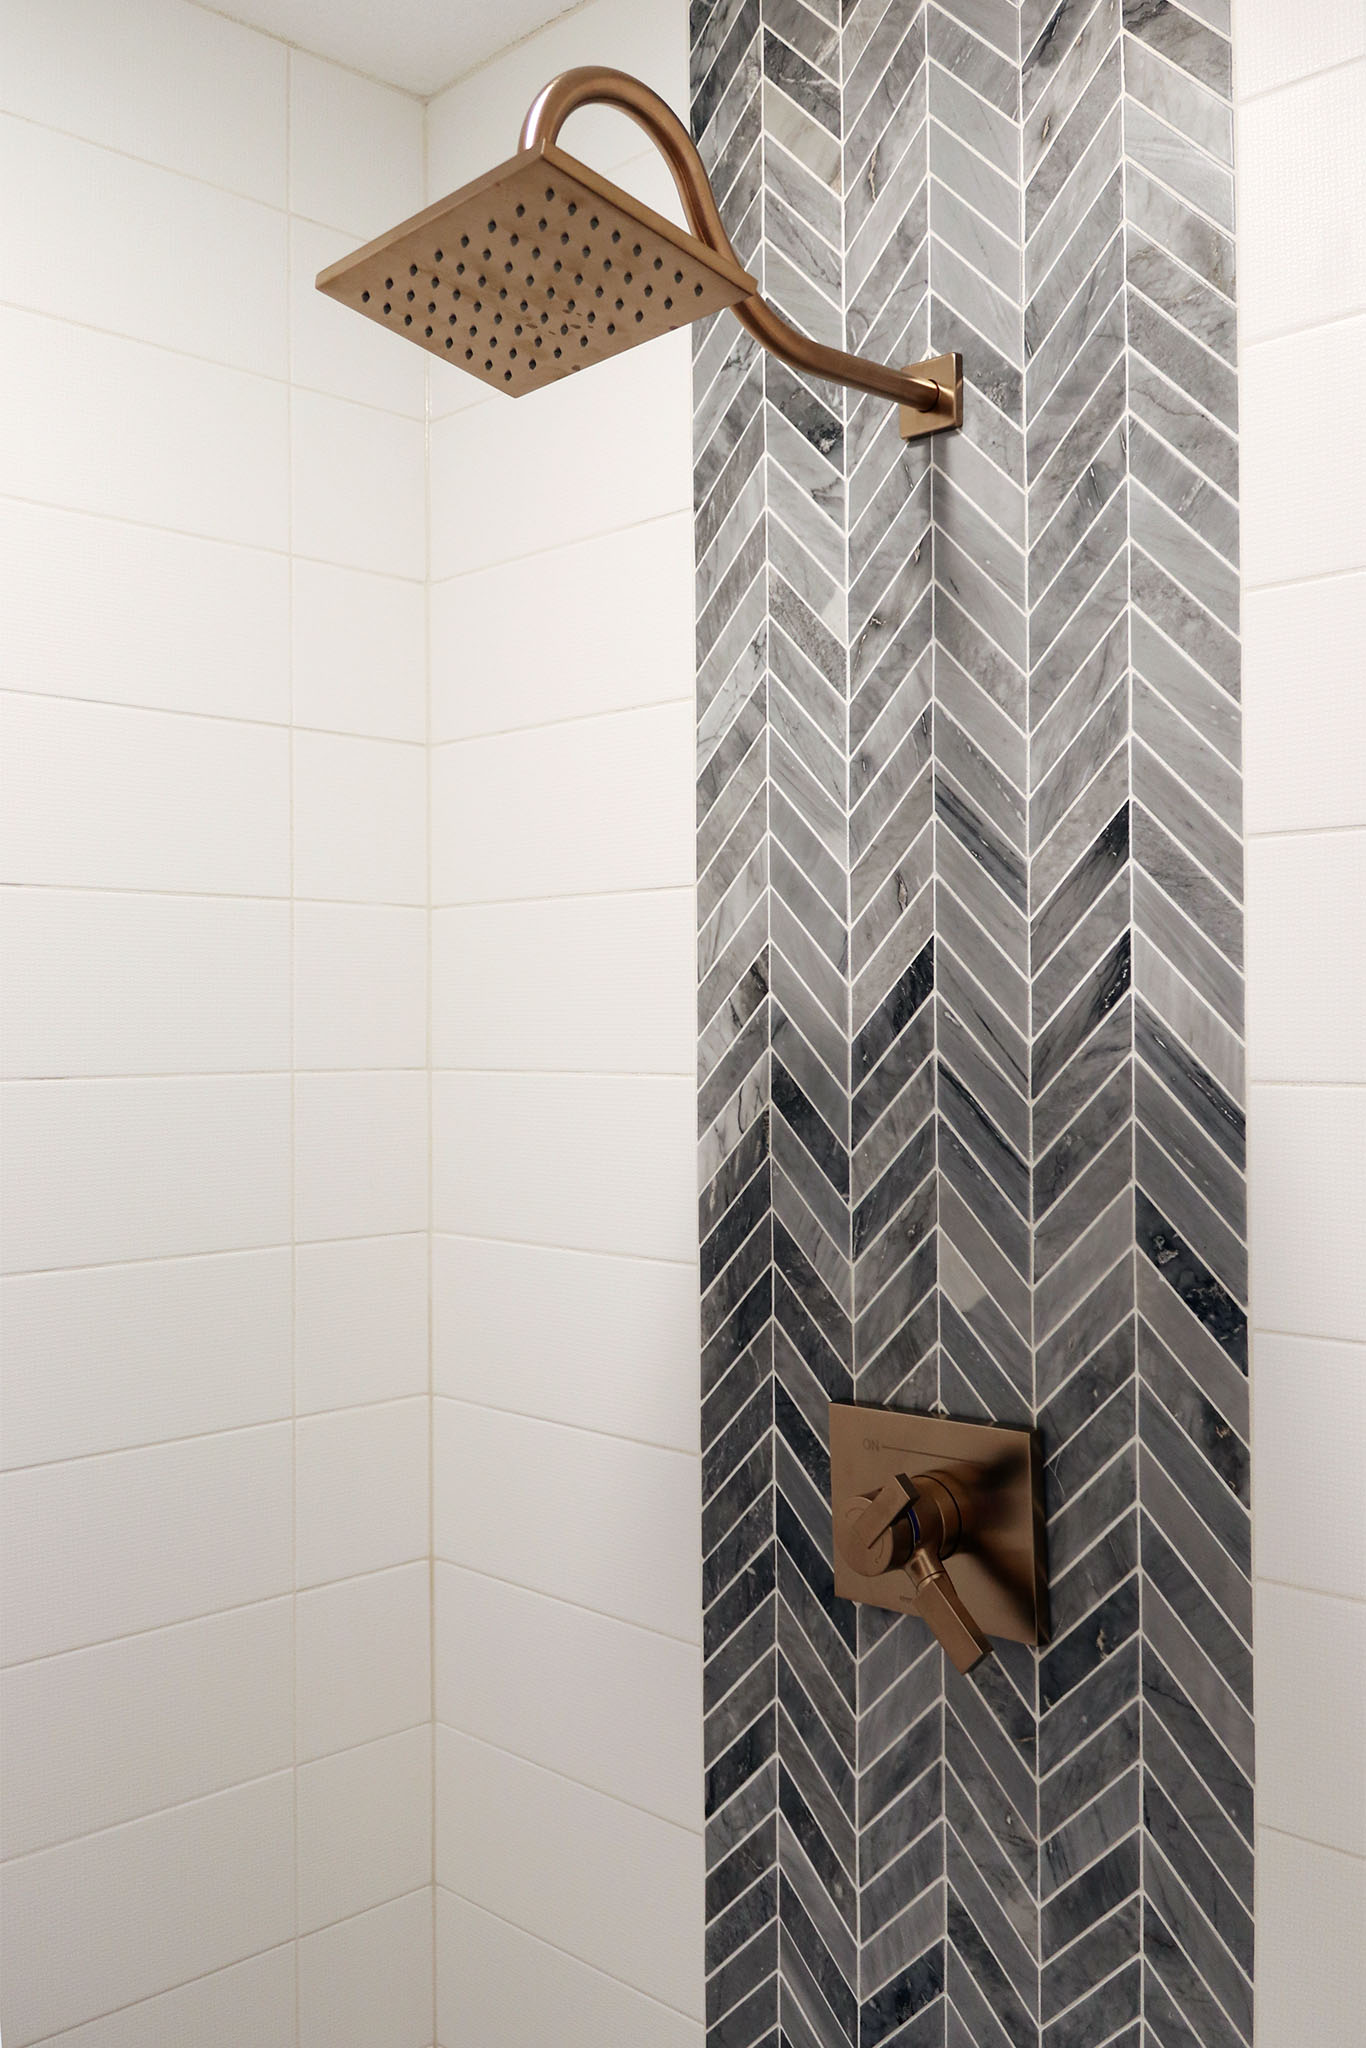 Walk-in ceramic tile shower with decorative ceramic accent tile and rain shower head